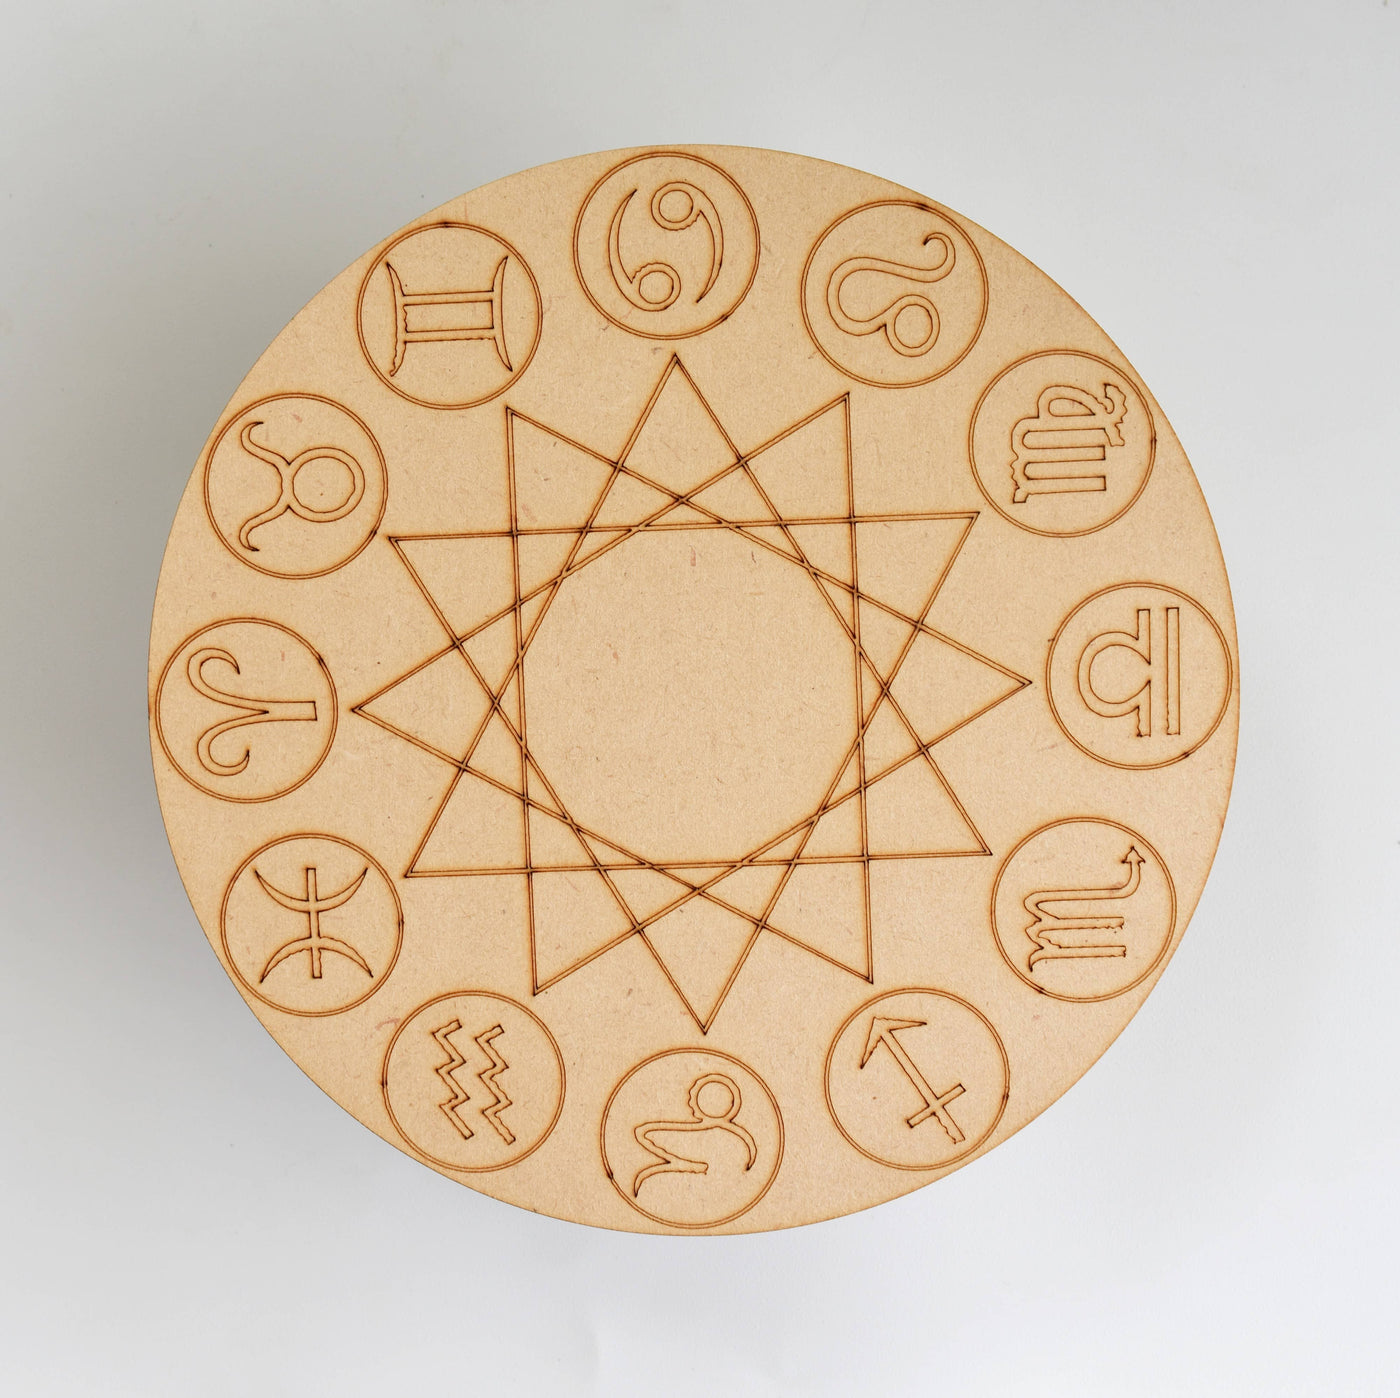 Tree of Life with Om Crystal Grid Board, 6" Wooden Crystal Grid Plate